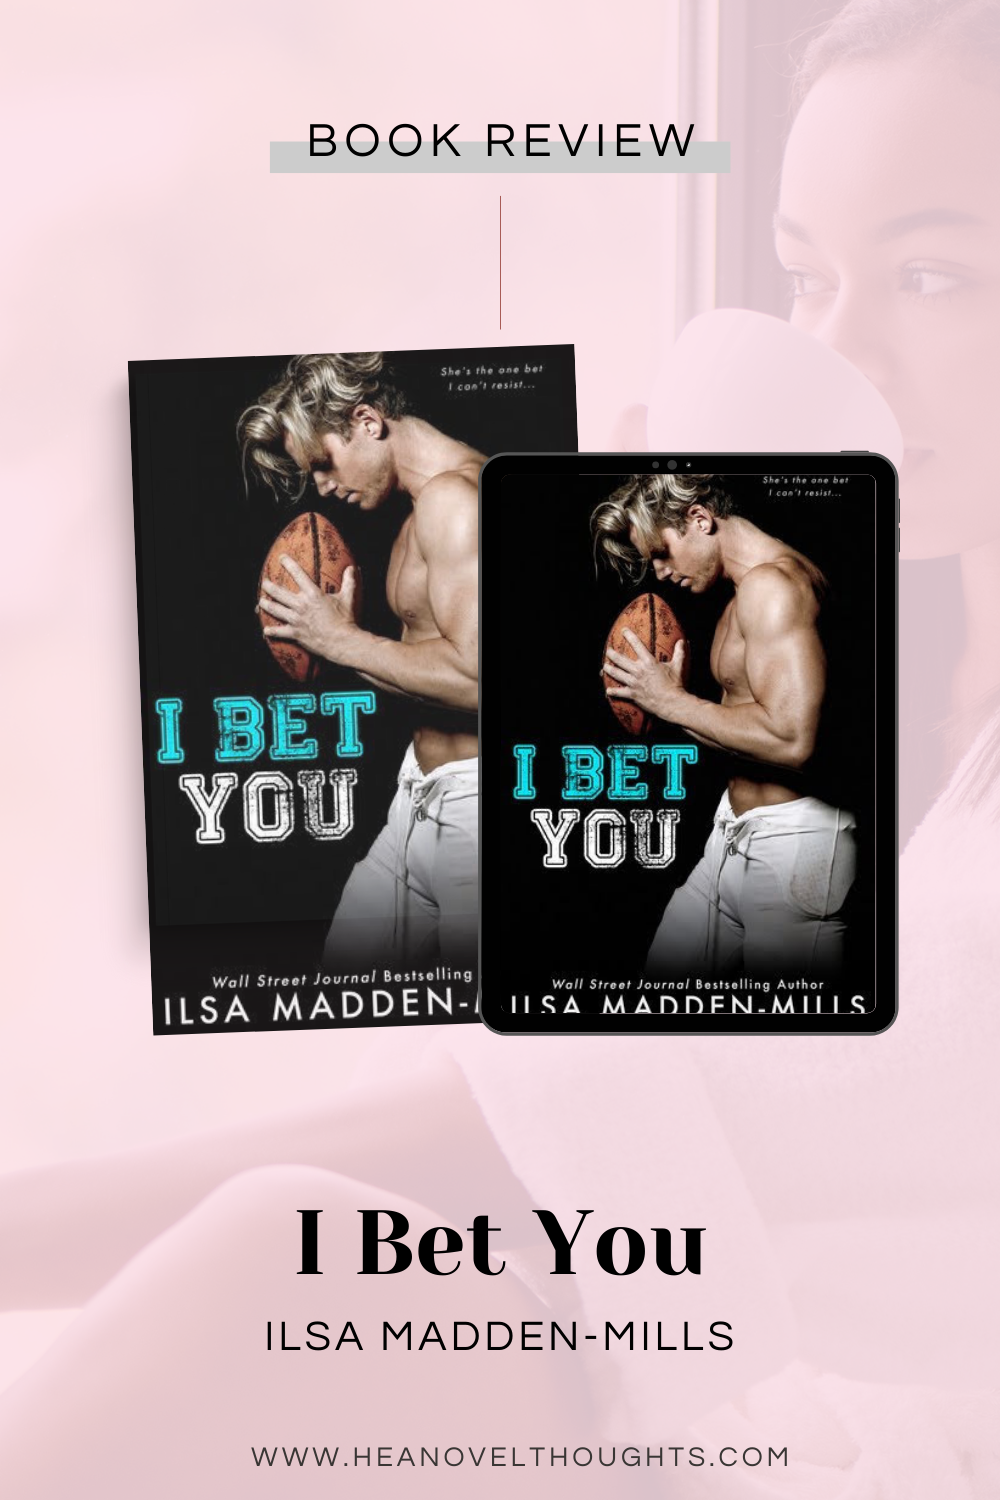 I Bet You by Ilsa Madden-Mills